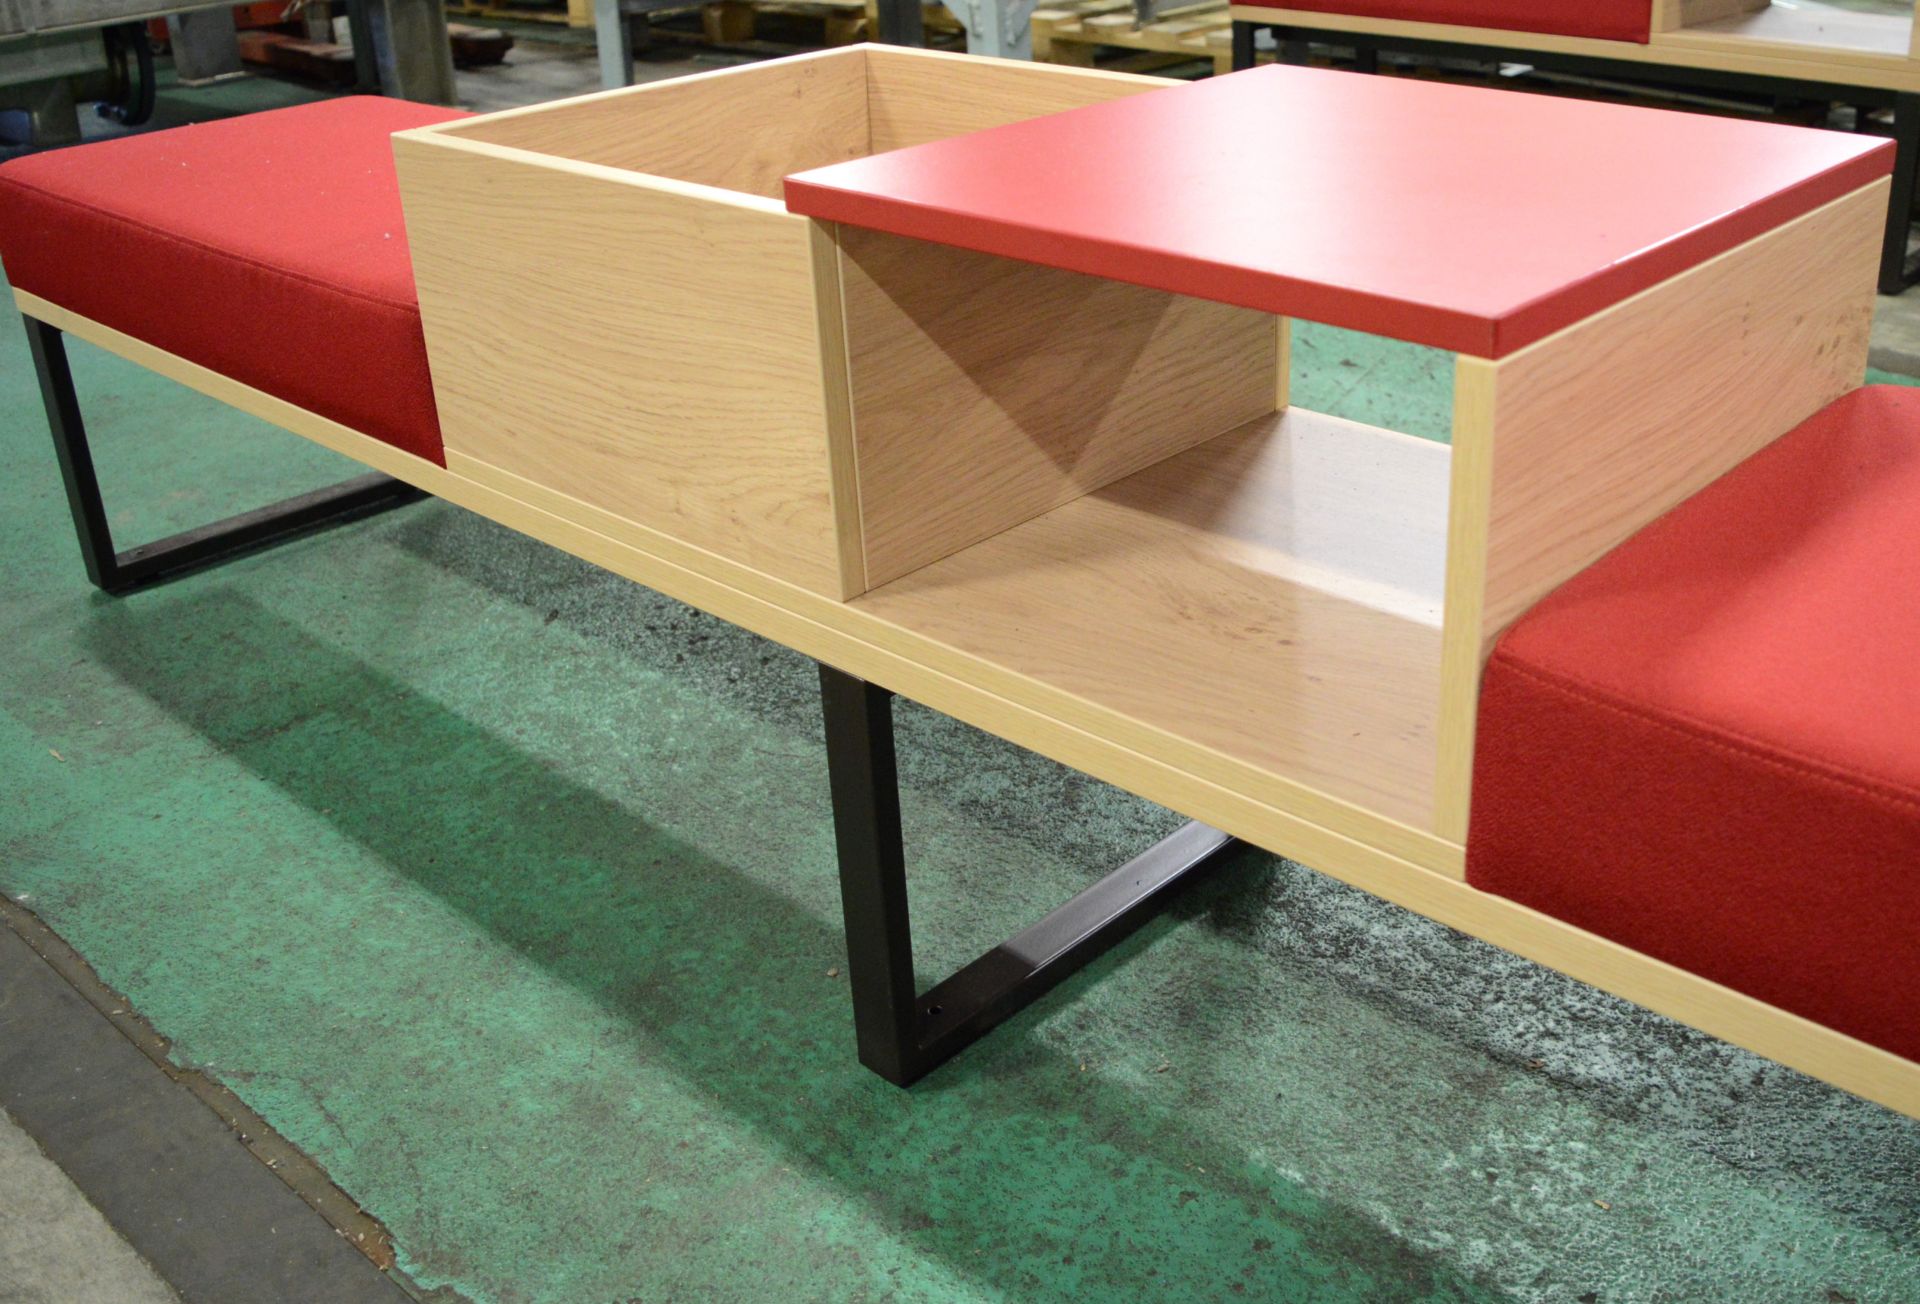 Bench Seat / Reception Furniture L 2440 x W 420mm - Unused. - Image 2 of 2